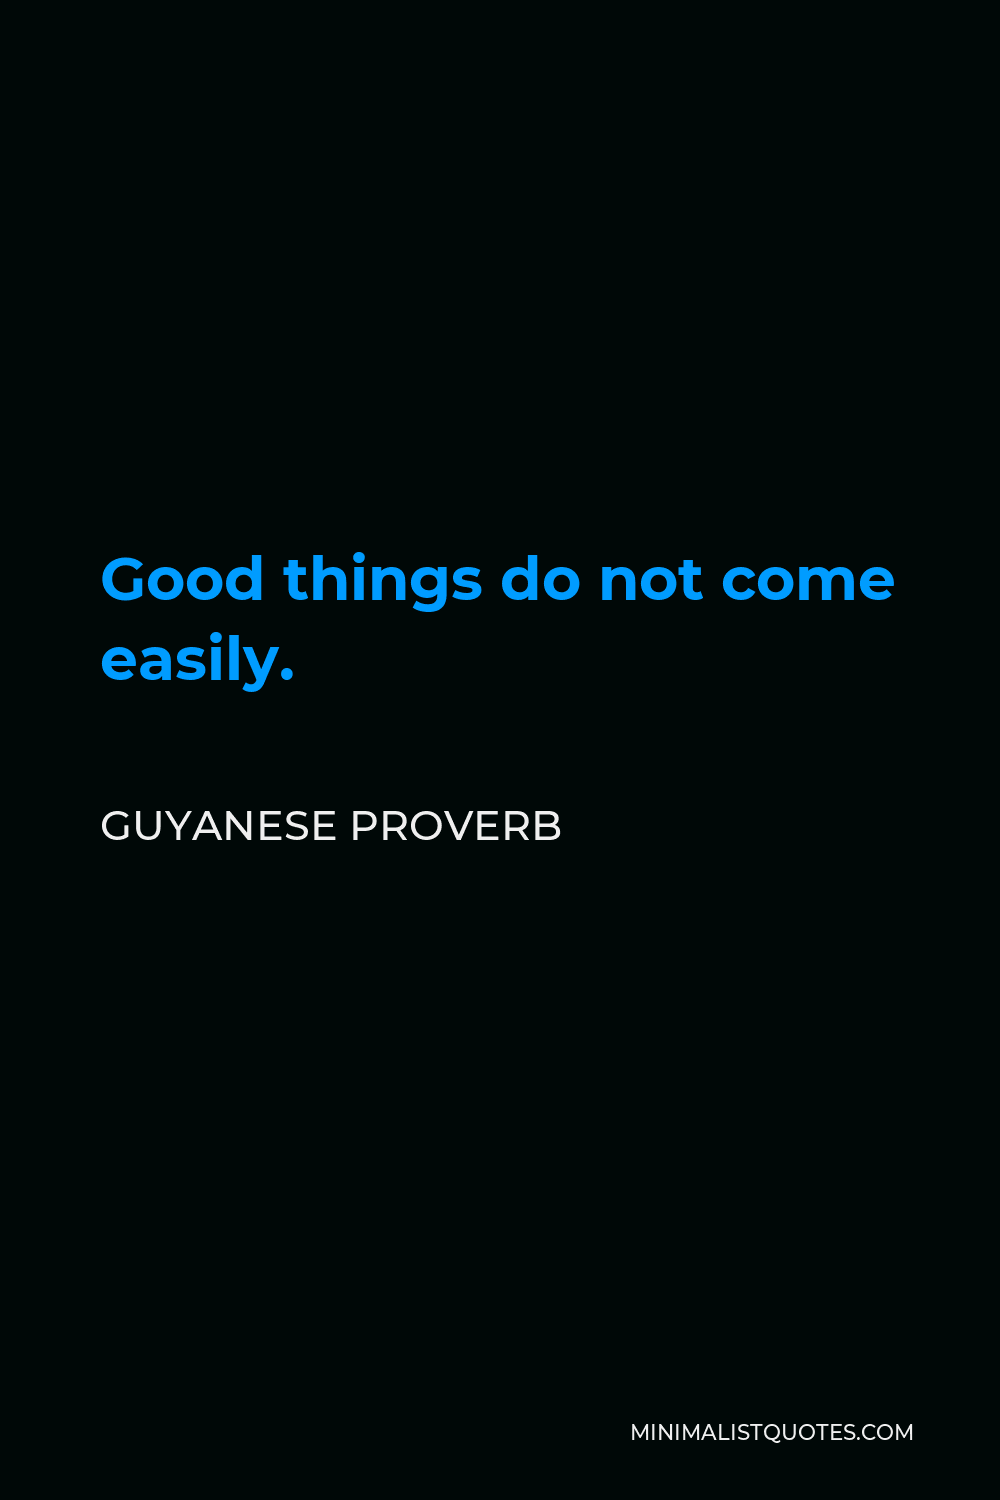 Guyanese Proverb Quote - Good things do not come easily.